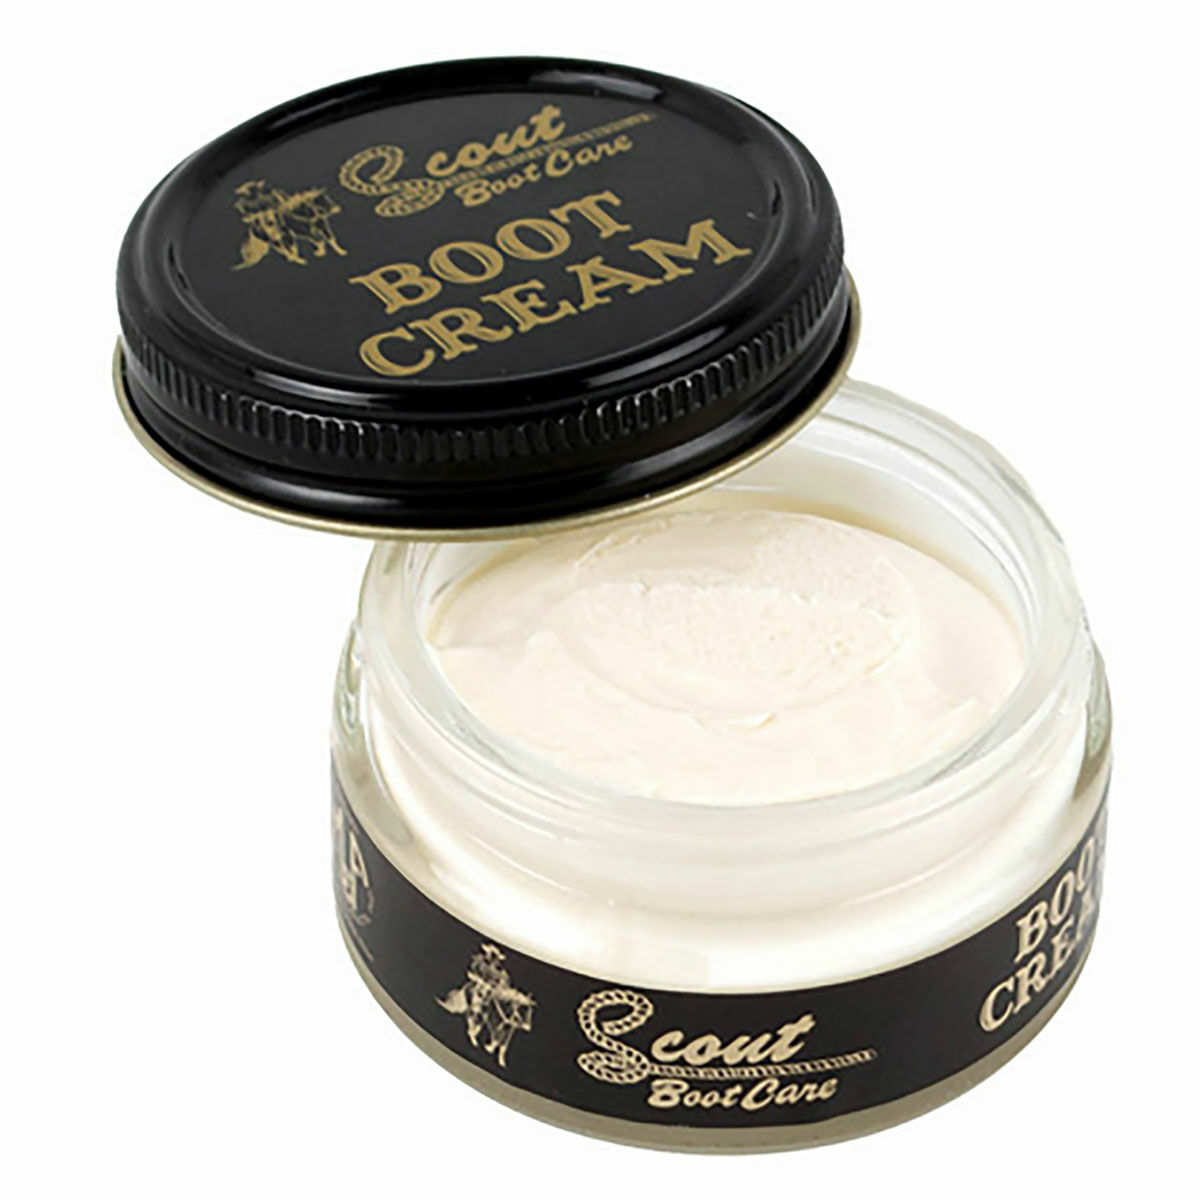 Scout Boot Care Boot Cream